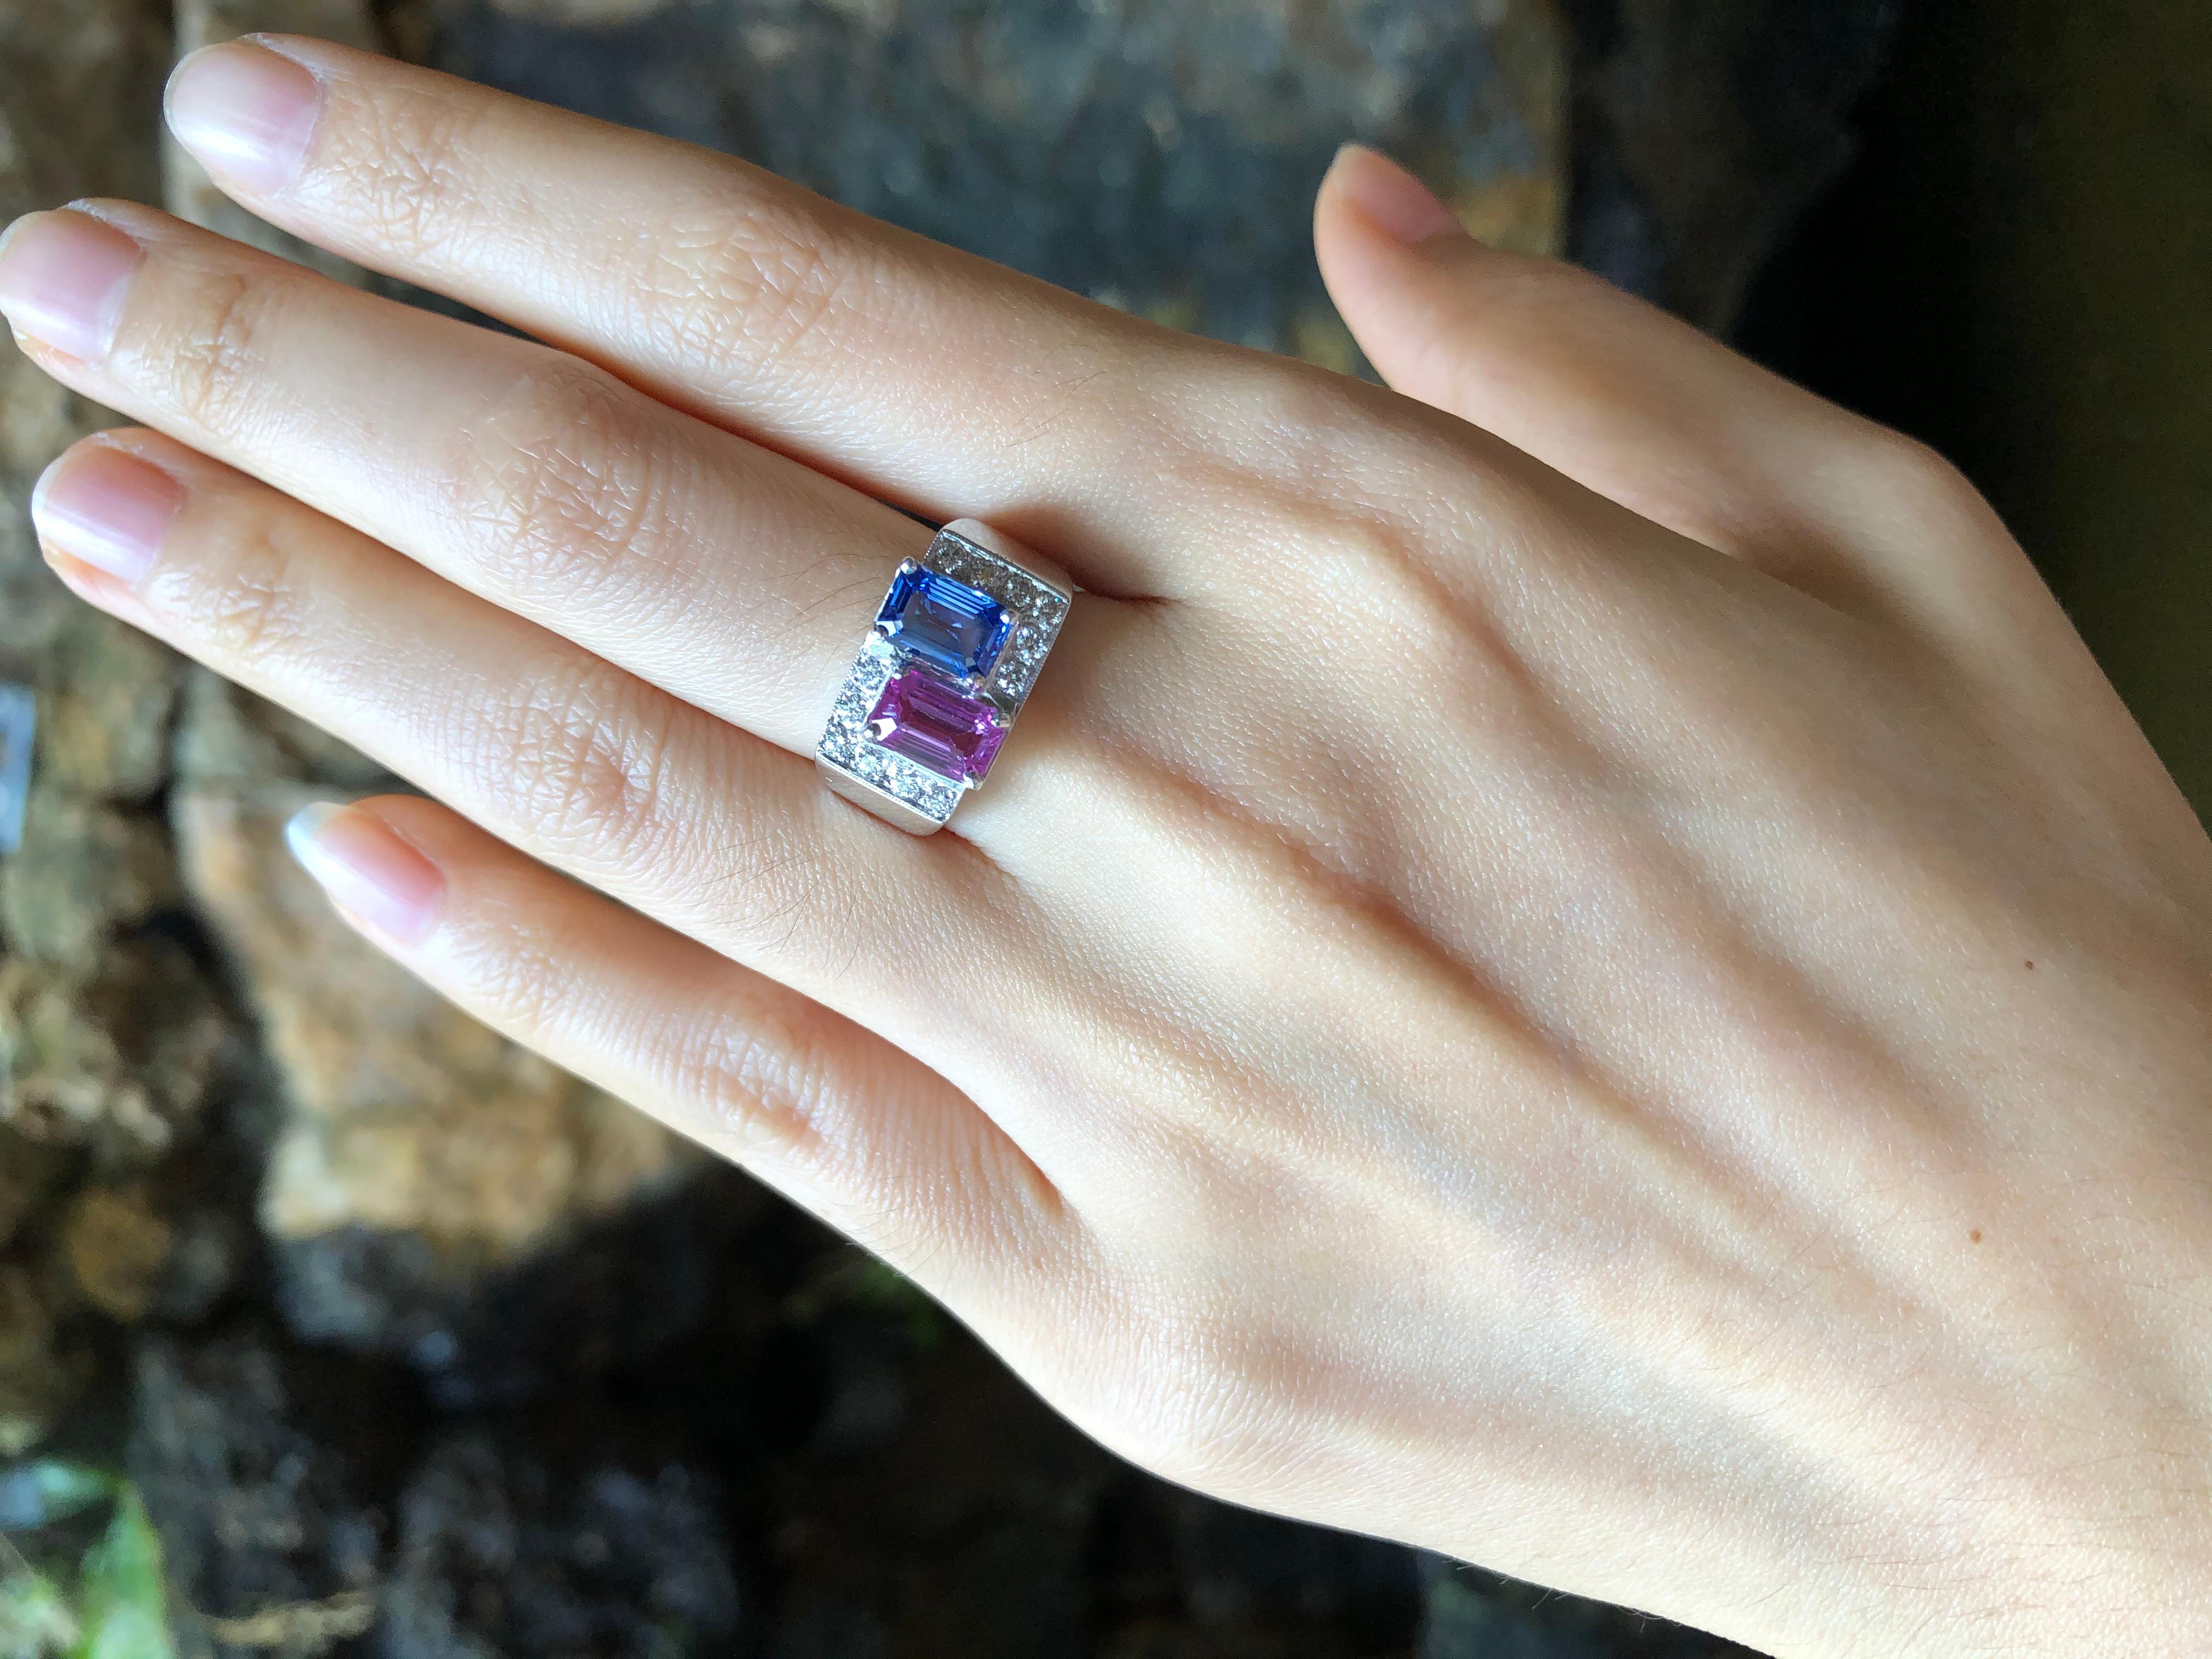 Blue Sapphire 1.02 carats, Pink Sapphire 1.26 carats with Diamond 0.29 carat Ring set in 18 Karat White Gold Settings

Width:  1.0 cm 
Length: 1.0 cm
Ring Size: 51
Total Weight9.68 grams

